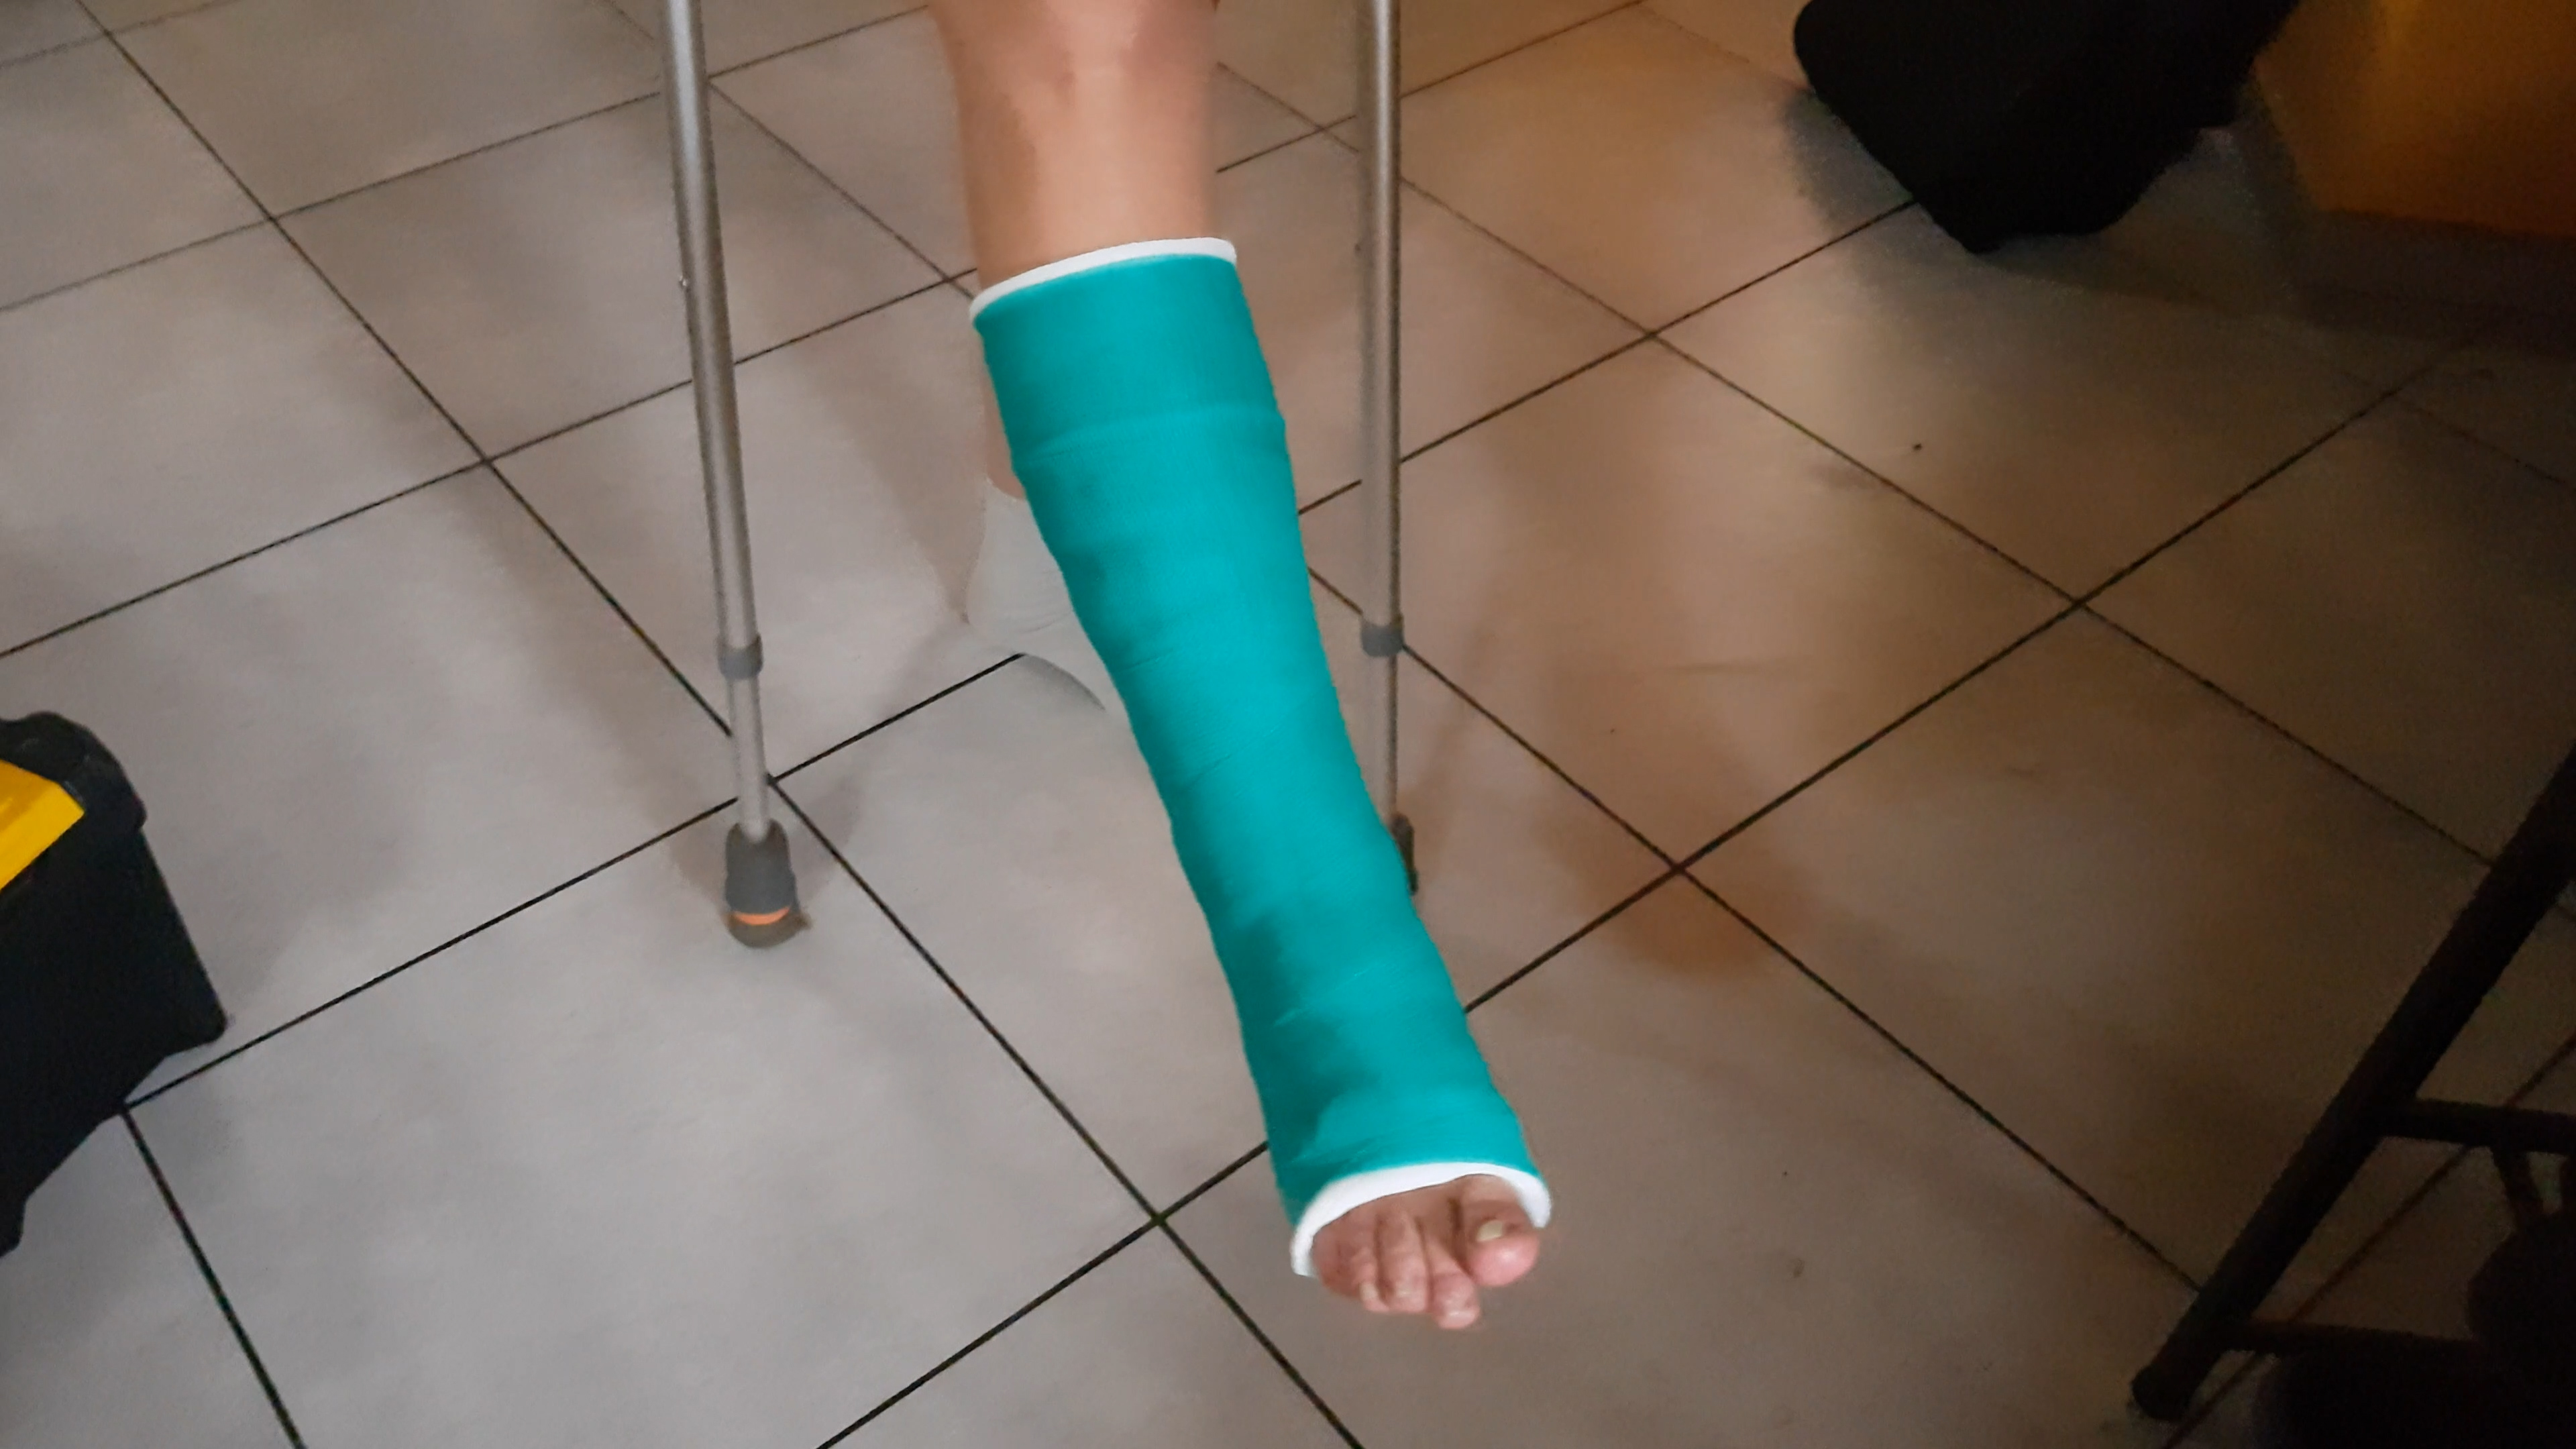 Drienne wears a fiber Slc for the first time.  The SLC is green in color, which she loves.  She moves on her crutches at home,  up and down the stairs, barefoot, and in a sock.  Beautiful close-ups on his green fiber Slc.  Vid 11:23